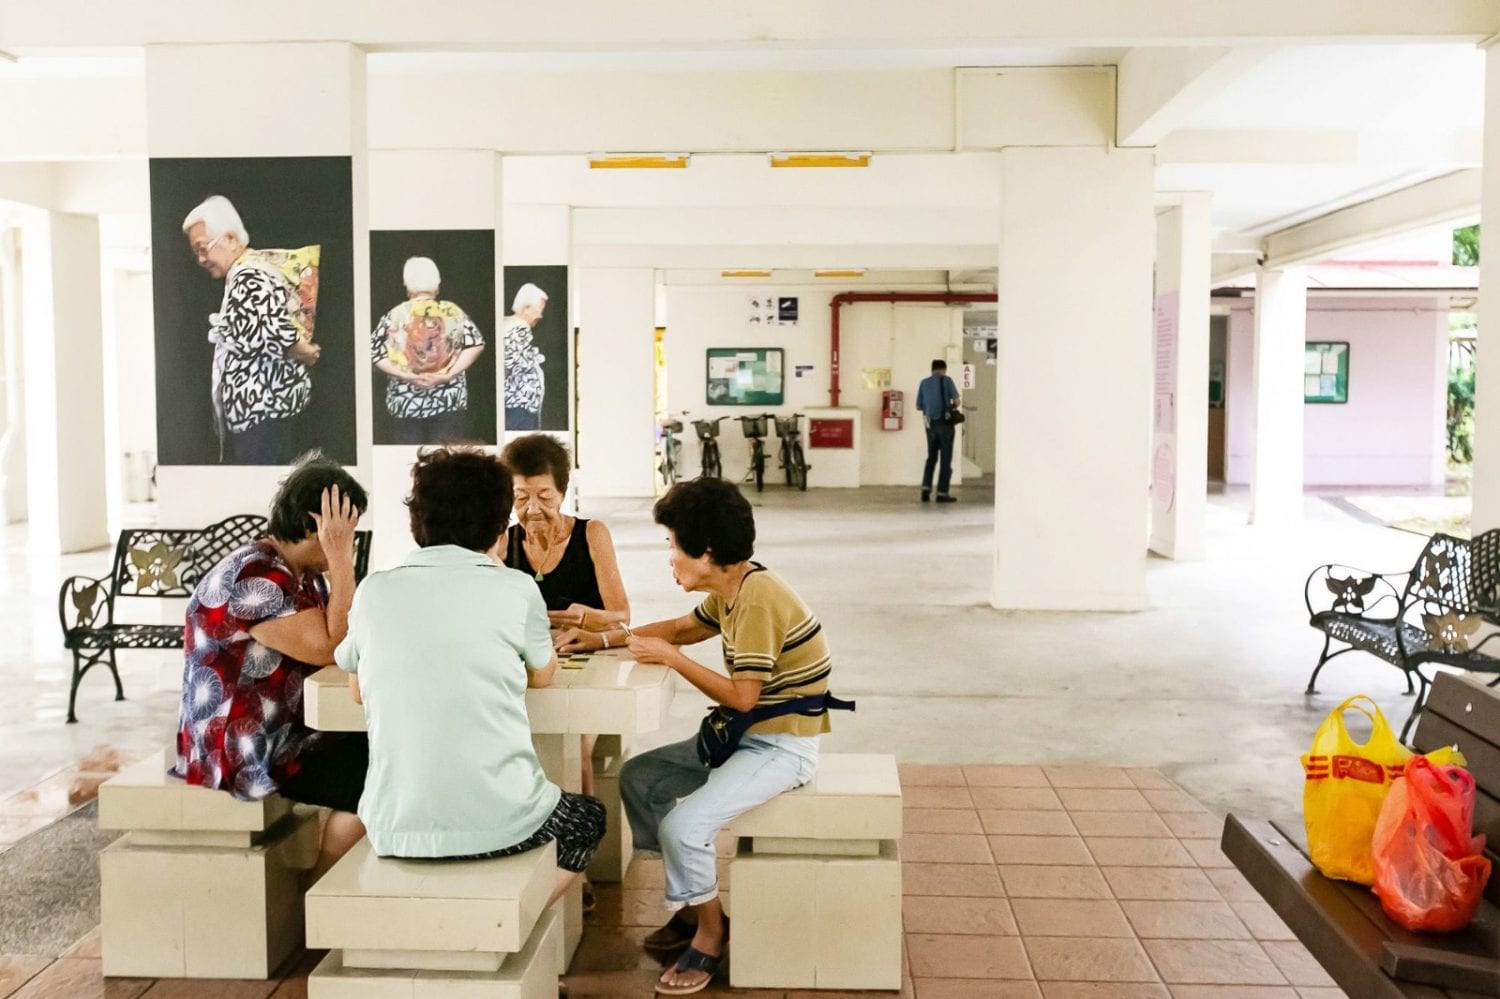 4 elderly women sitting around a void deck table with red and yellow plastic bags on bench